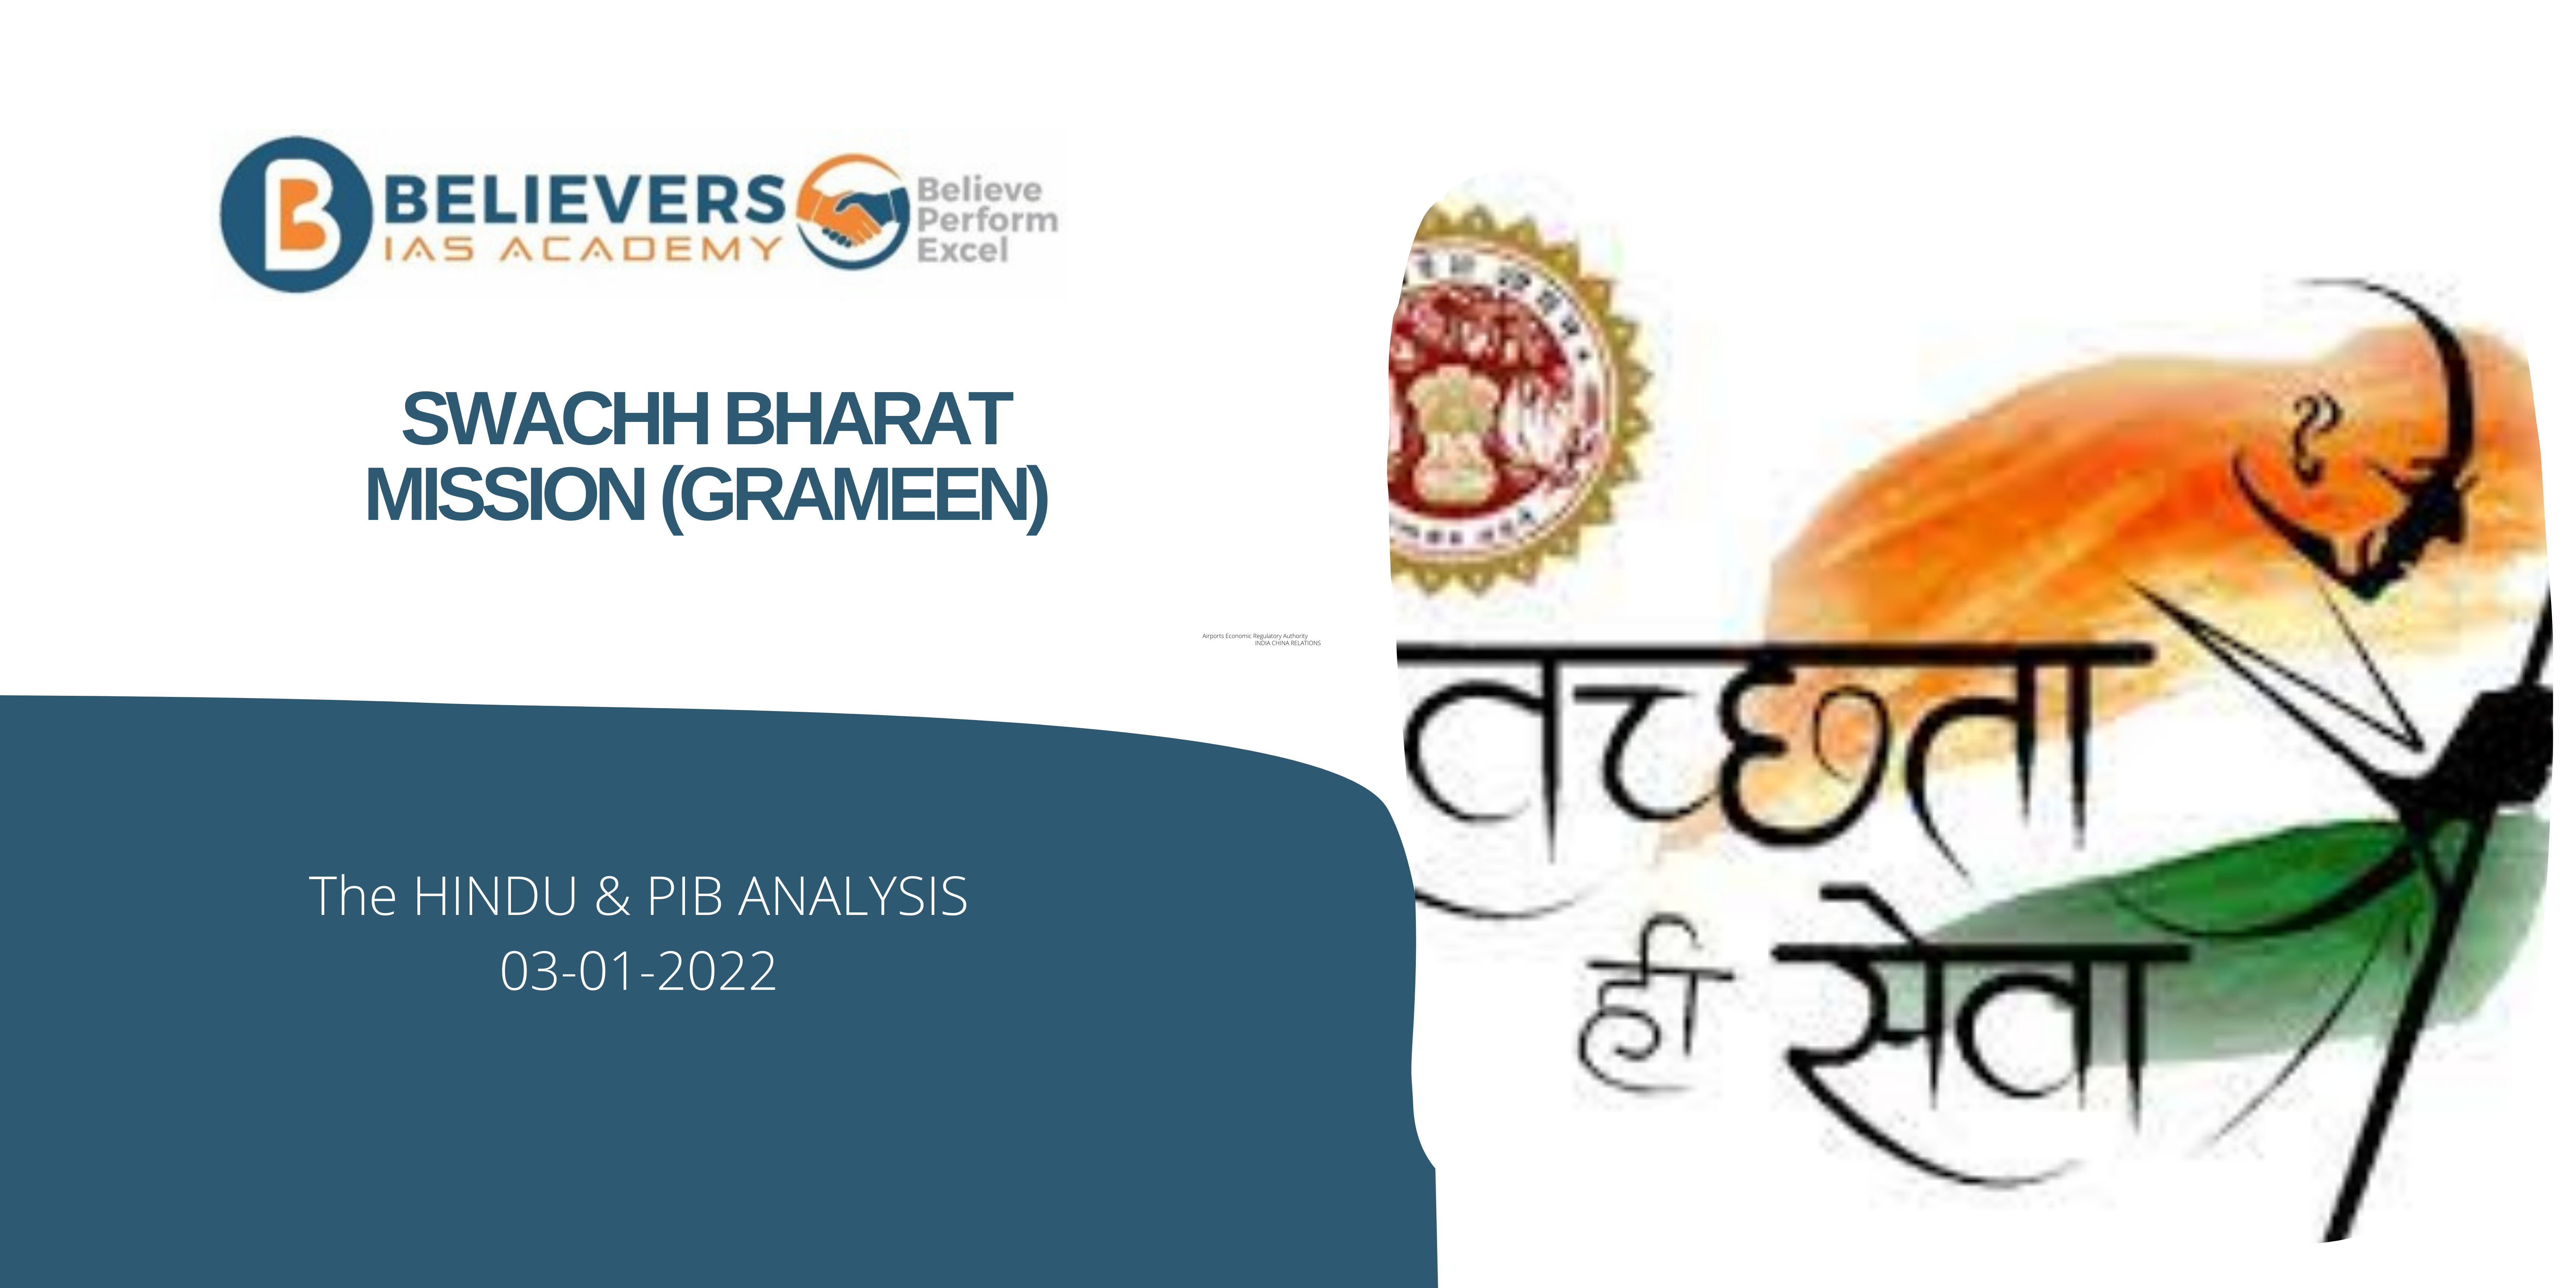 IAS Current affairs - SWACHH BHARAT MISSION (GRAMEEN)